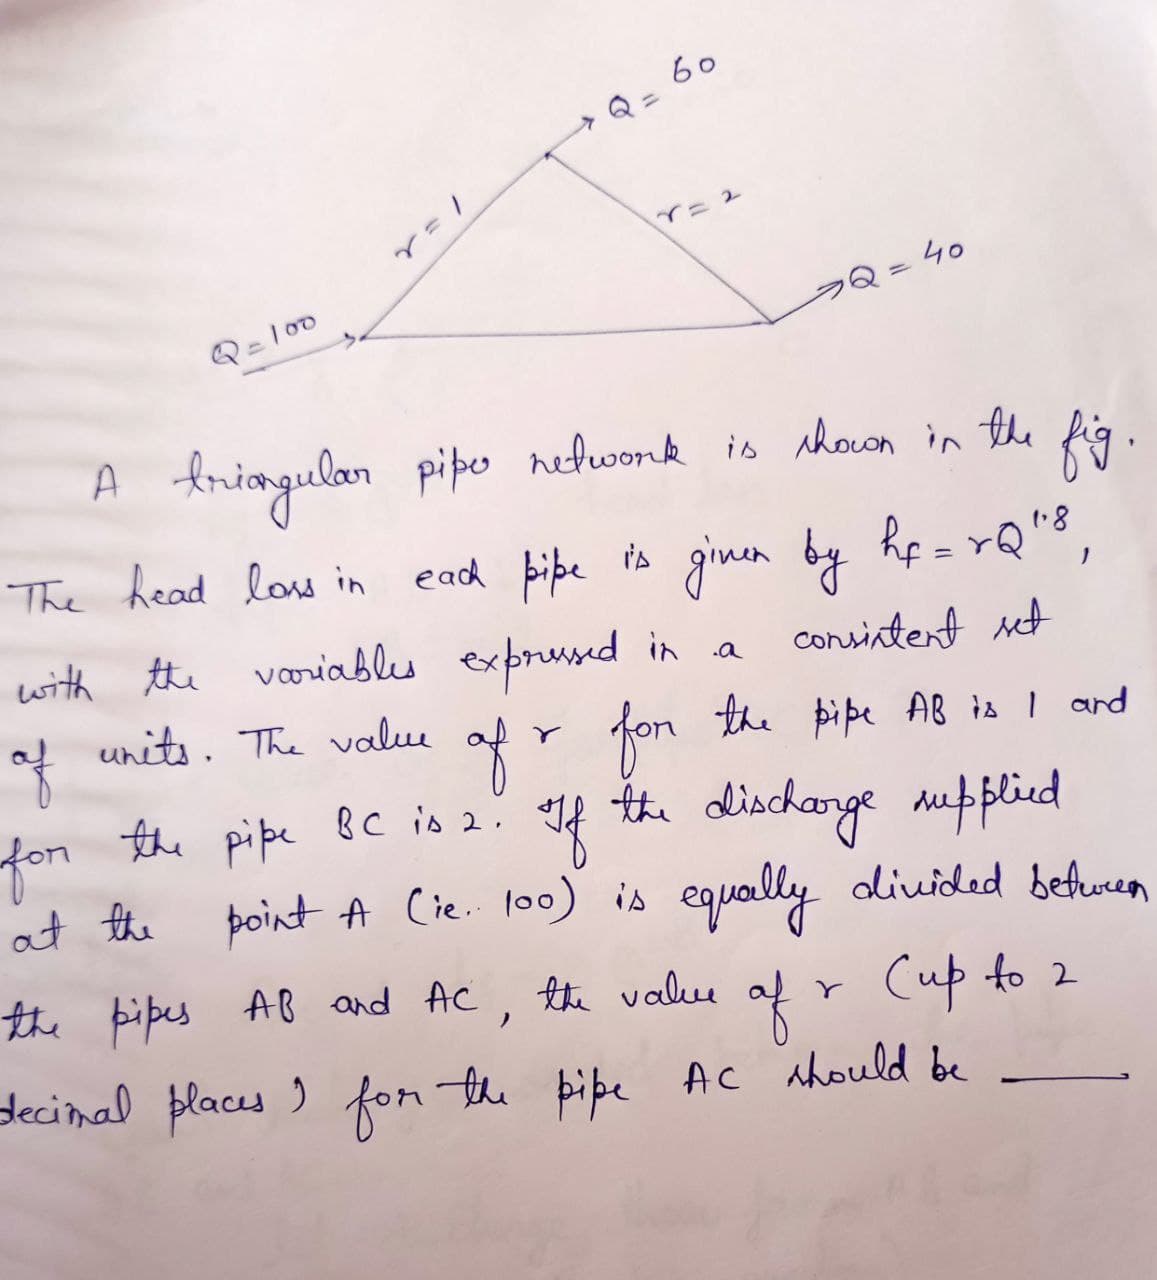 Q=100
60
A triangular piper network is shown in the
The head loss in
2 = 40
with the variables expressed in a
each pipe is given by hf=rQ"8
consistent set
of
for the pipe BC is 2.
at the
units. The value of r for the pipe
fig.
the pipe AB is I and
If the discharge supplied
point A (ie. 100) is equally divided between
Cup to 2
the pipes AB and AC, the value
of
decimal places I for the pipe AC should be